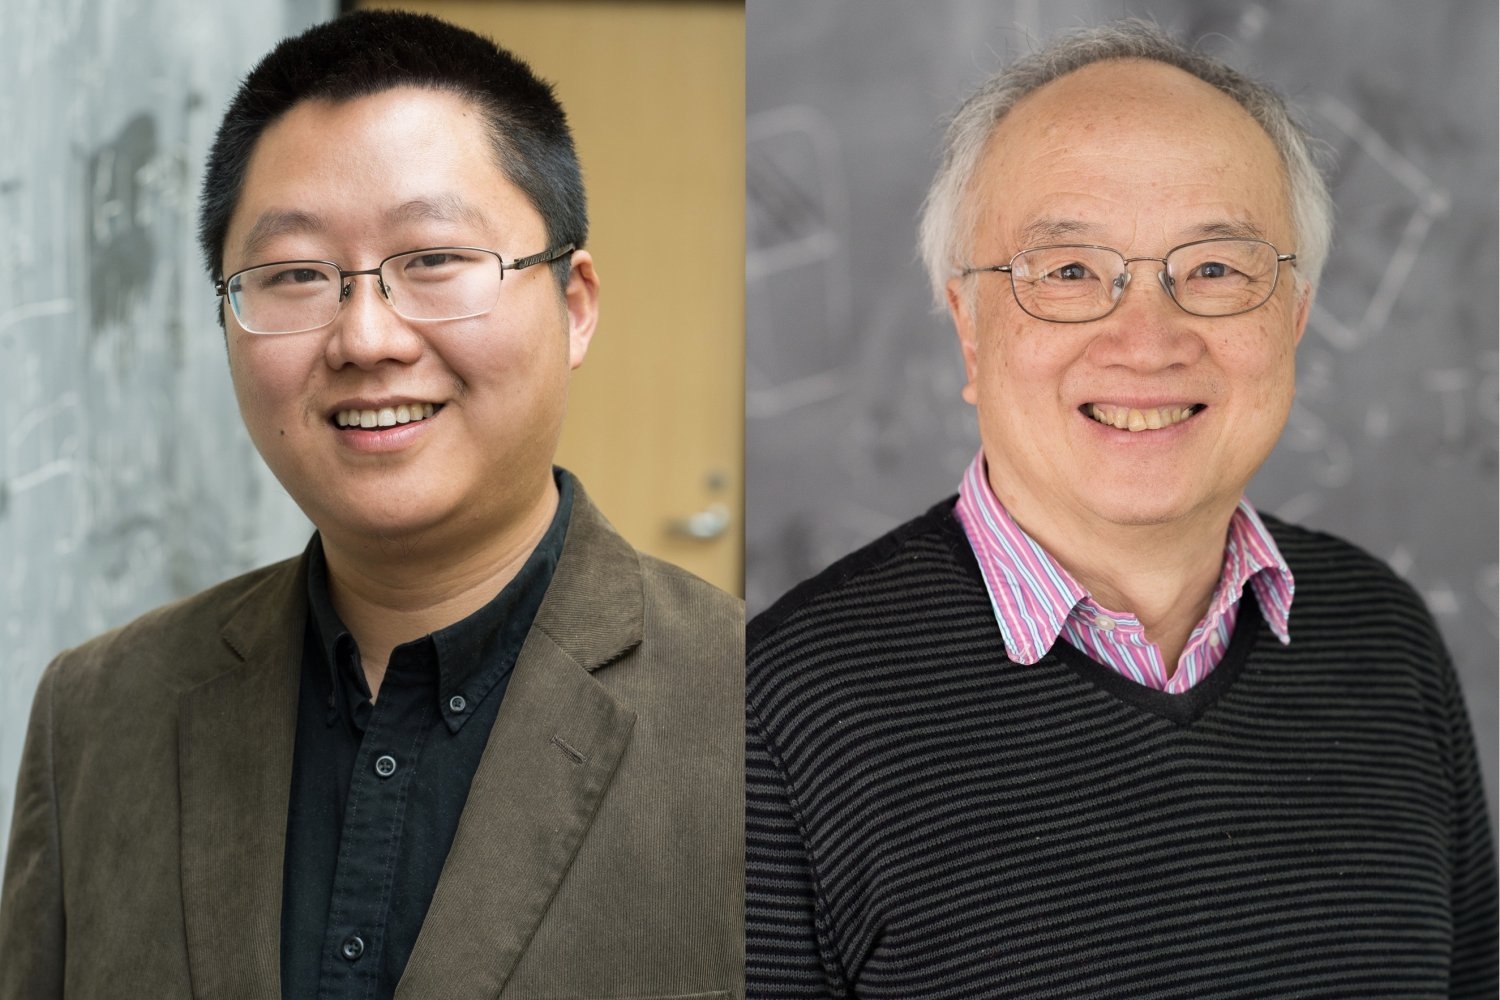 Condensed matter theory professors of physics Liang Fu (left) and Patrick Lee are the recipients of the inaugural Larkin Awards in Theoretical Physics.